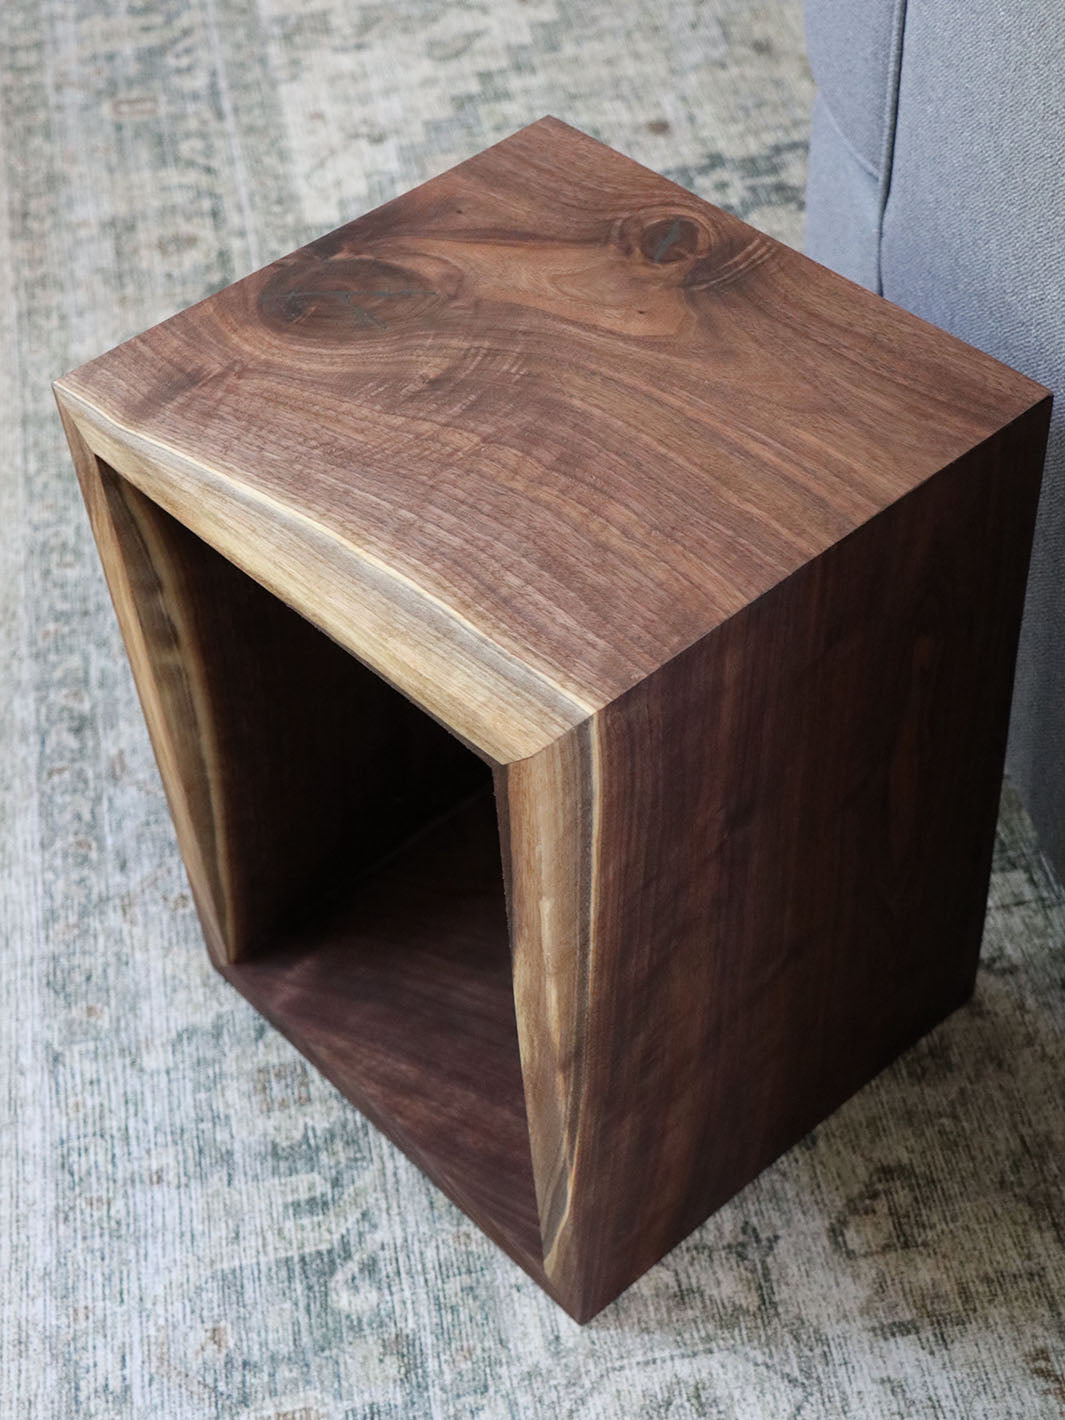 Complete Walnut Waterfall Cube Rectangle Side Table, Cuboid End Table Earthly Comfort Side Tables - 2